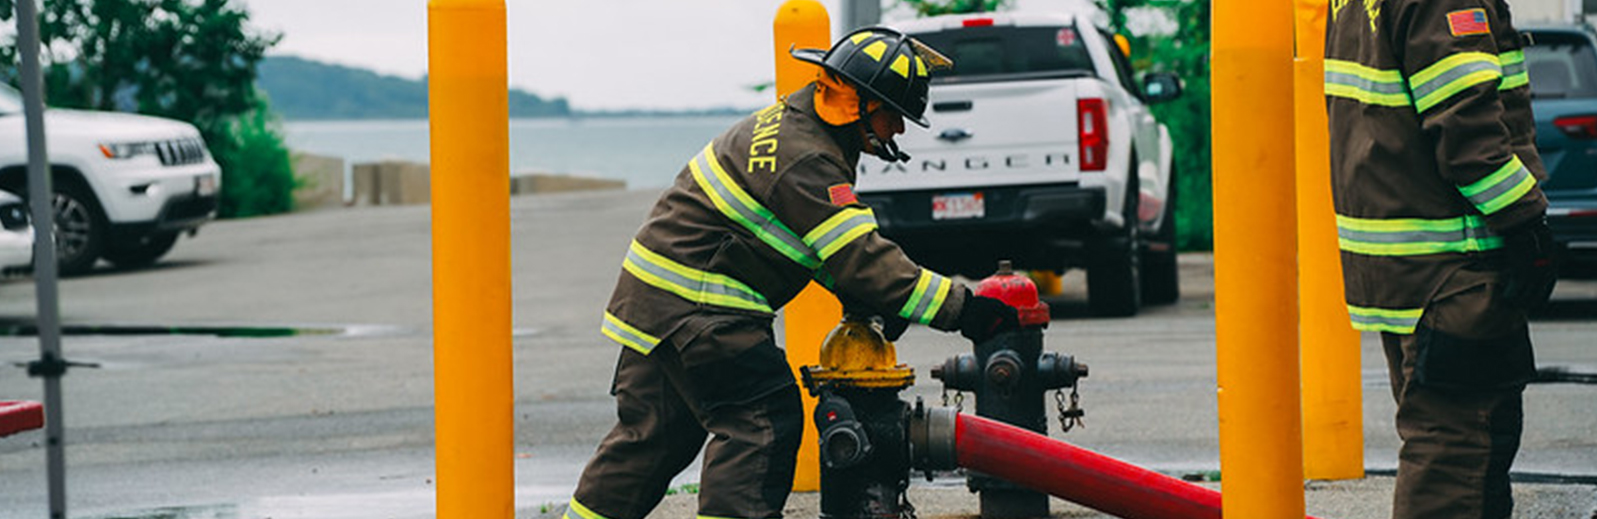 Fire fighter working at a hydrant